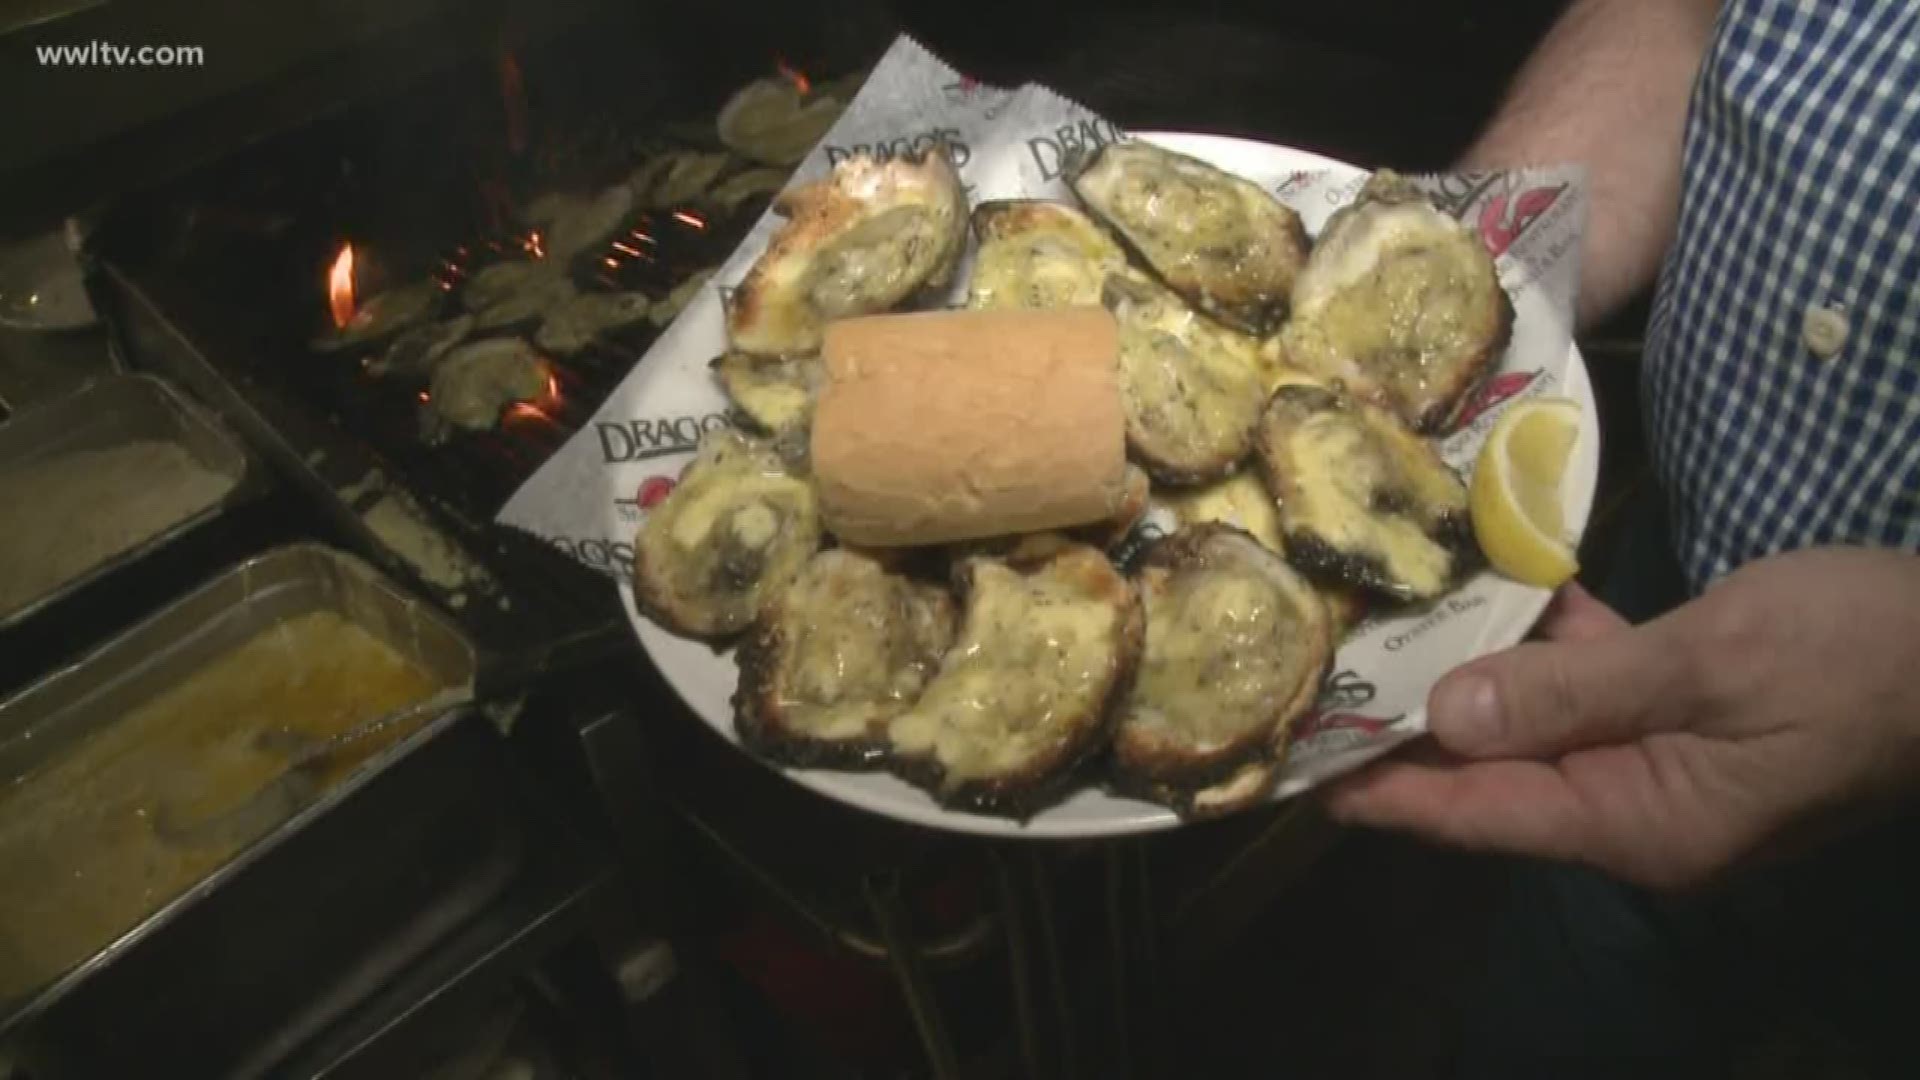 Leslie visits the 70002 zip code to highlight one of the staples of Metairie, Drago's restaurant and their famous oysters.